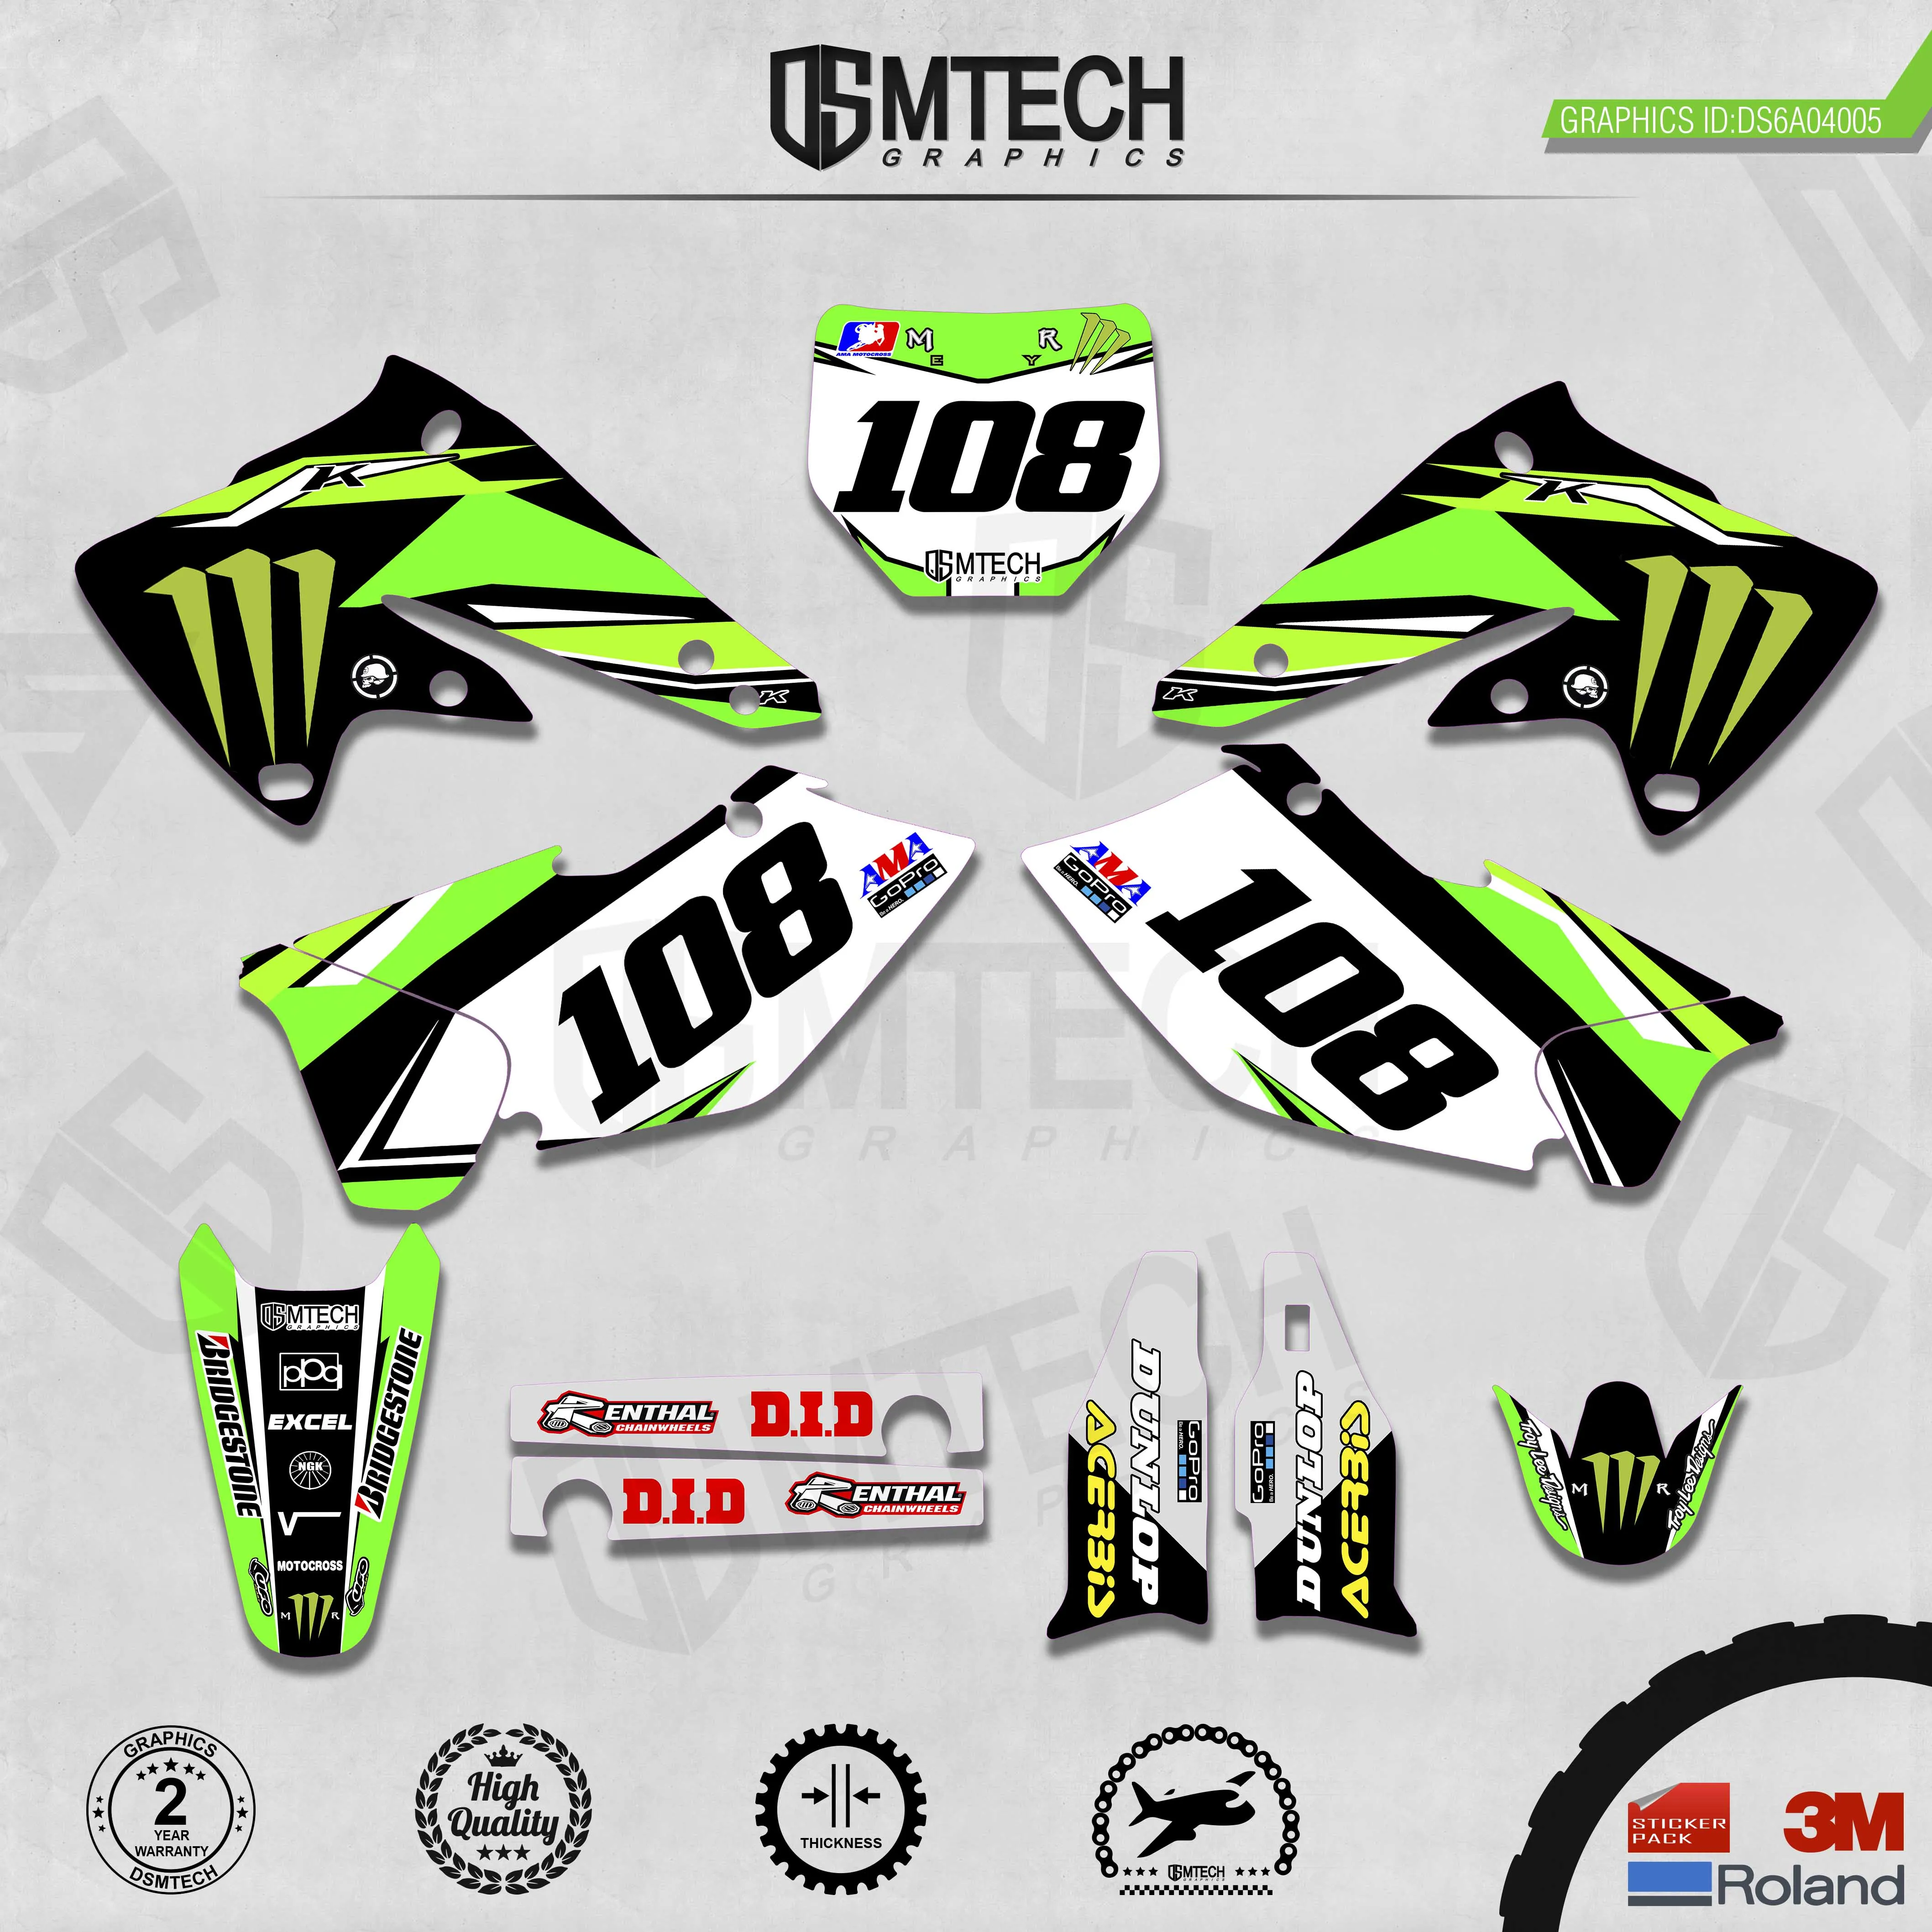 dsmtech-customized-team-graphics-backgrounds-decals-3m-custom-stickers-for-kawasaki-2004-2005-kxf250-005